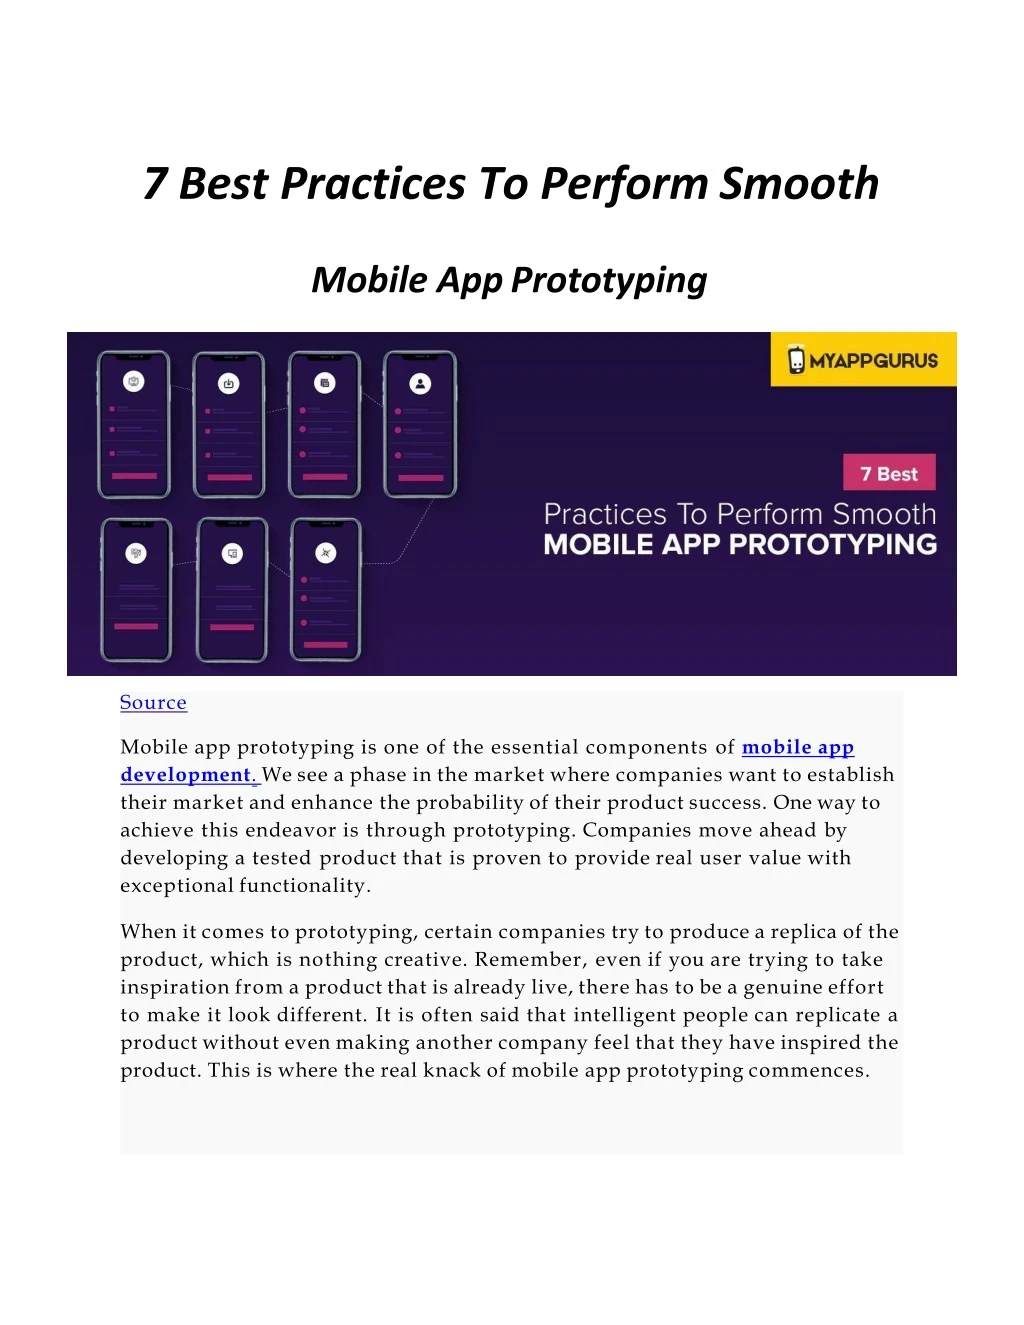 7 best practices to perform smooth